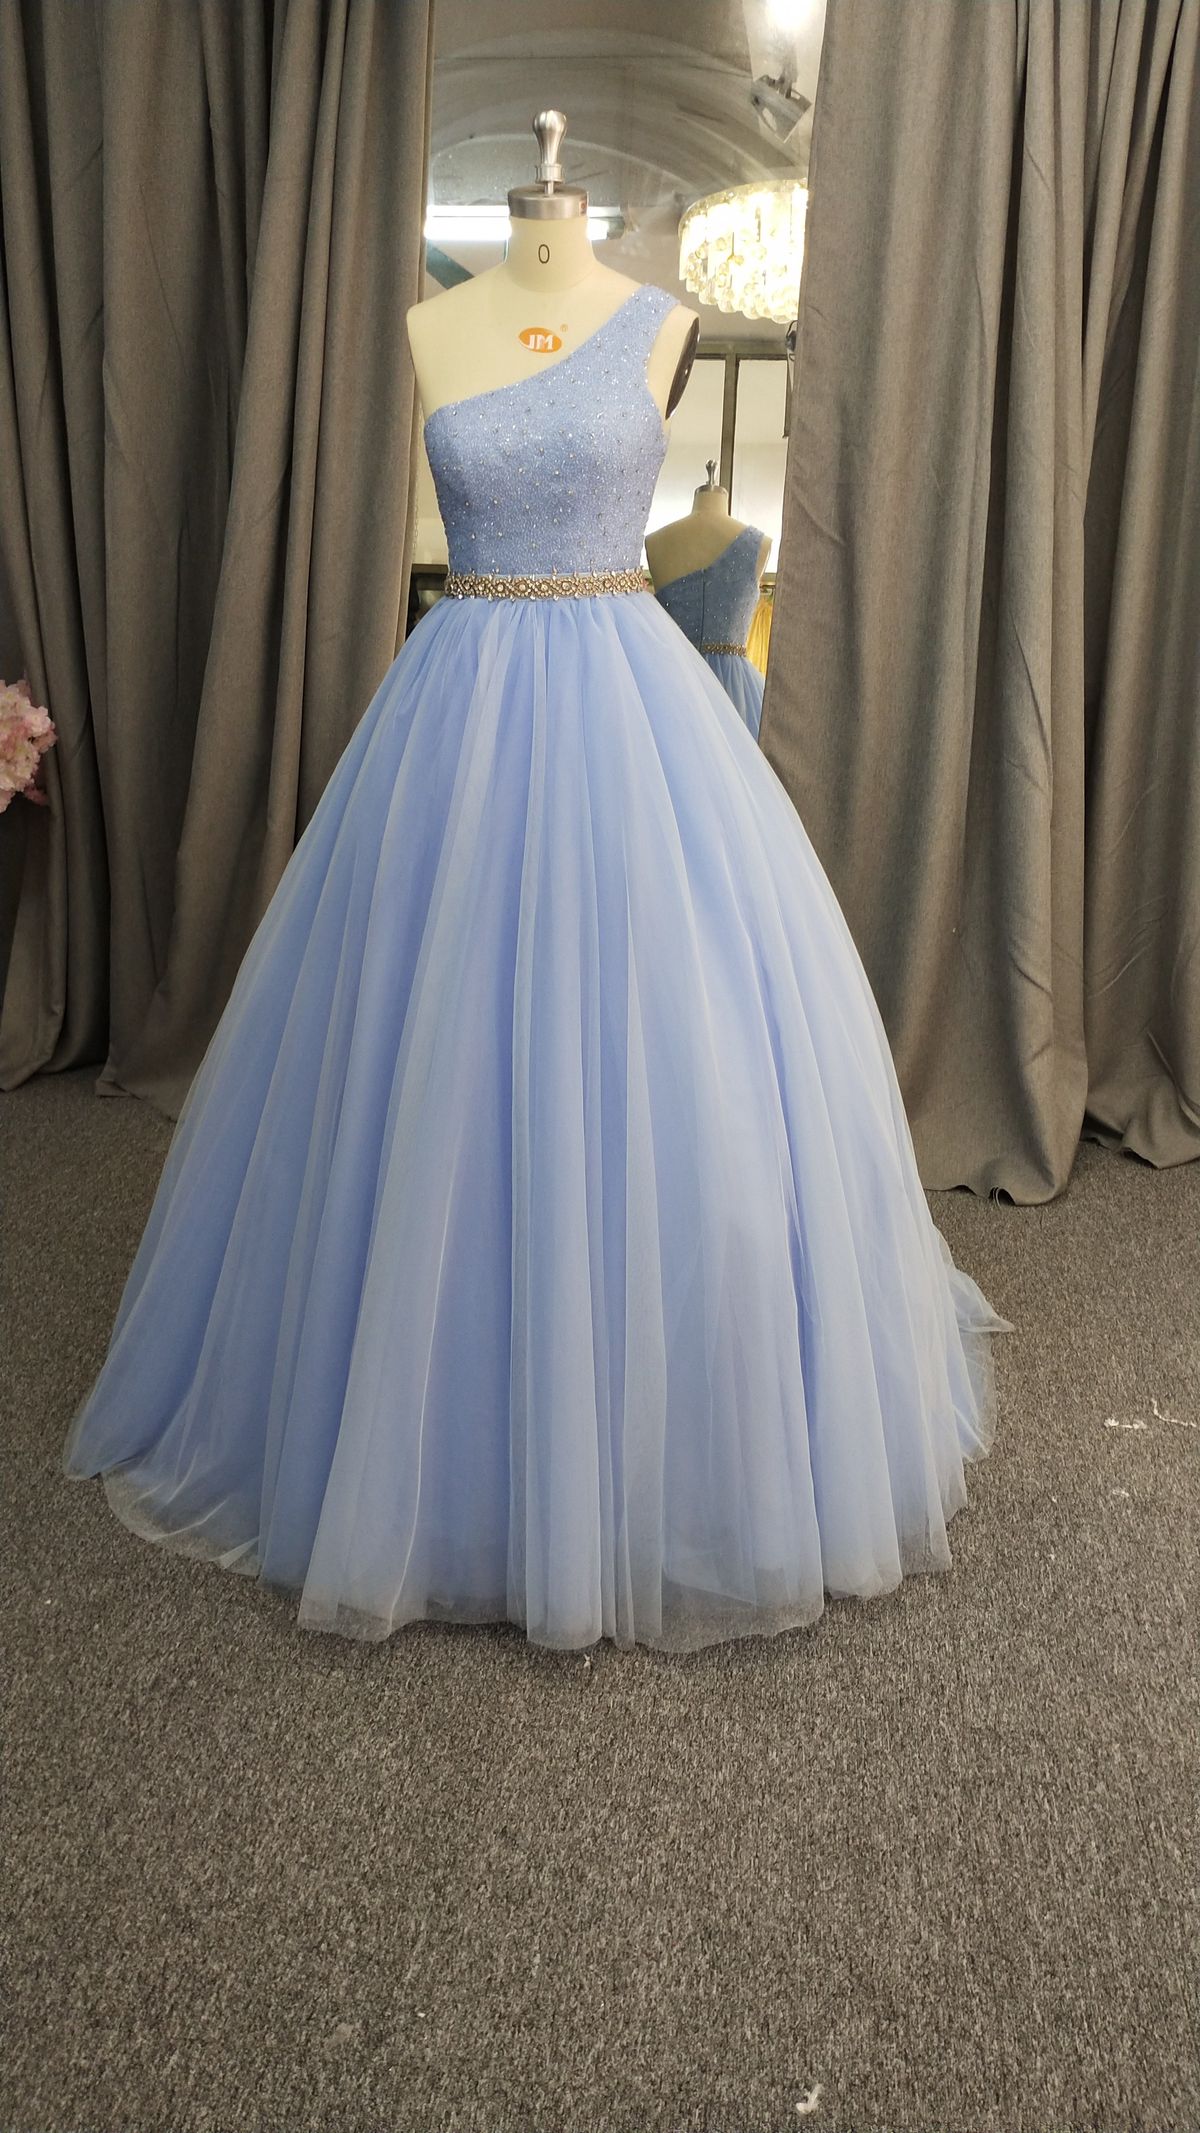 Style C2020-LDuff2 One shoulder formal evening dress Darius Cordell Size 8 Prom One Shoulder Light Blue Ball Gown on Queenly